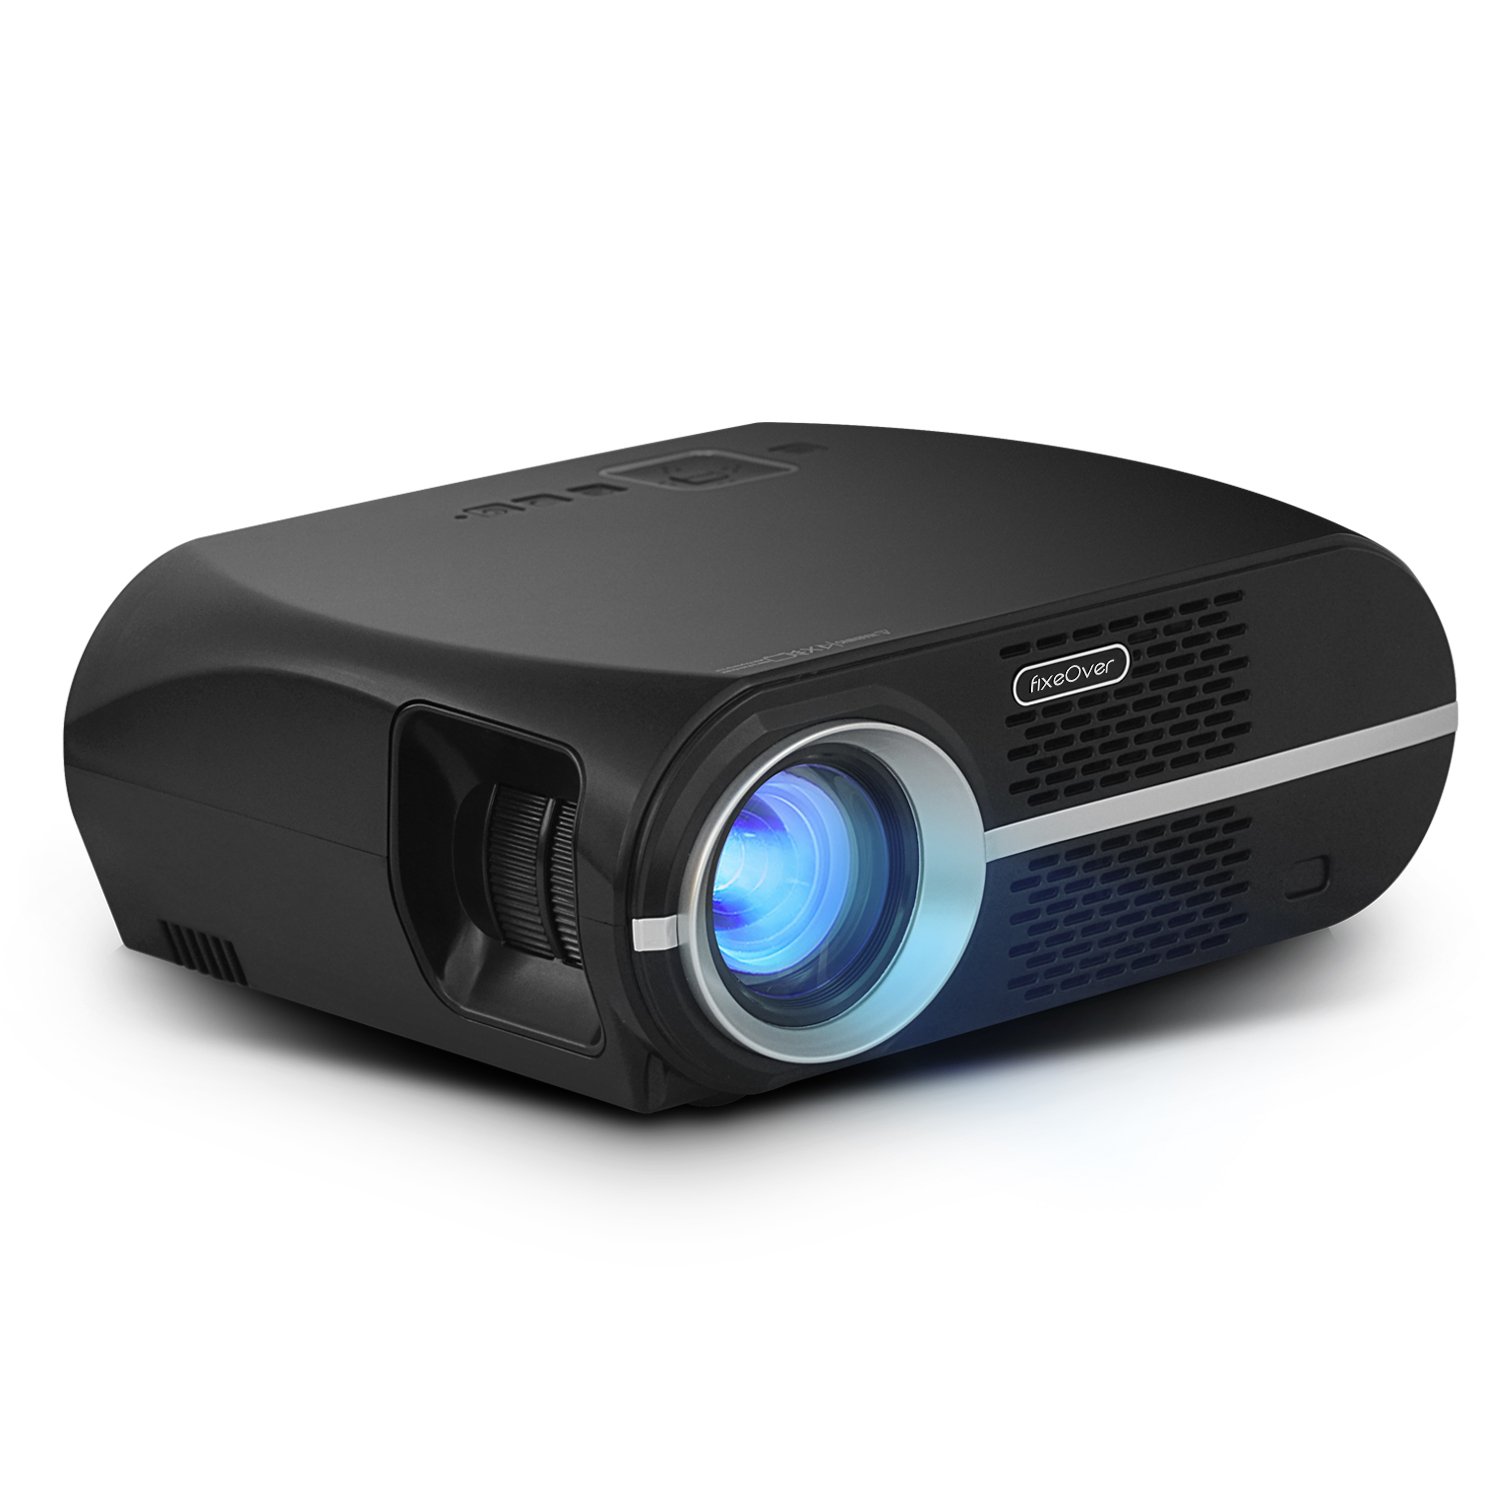 The 10 Best Gaming Projectors Under $200